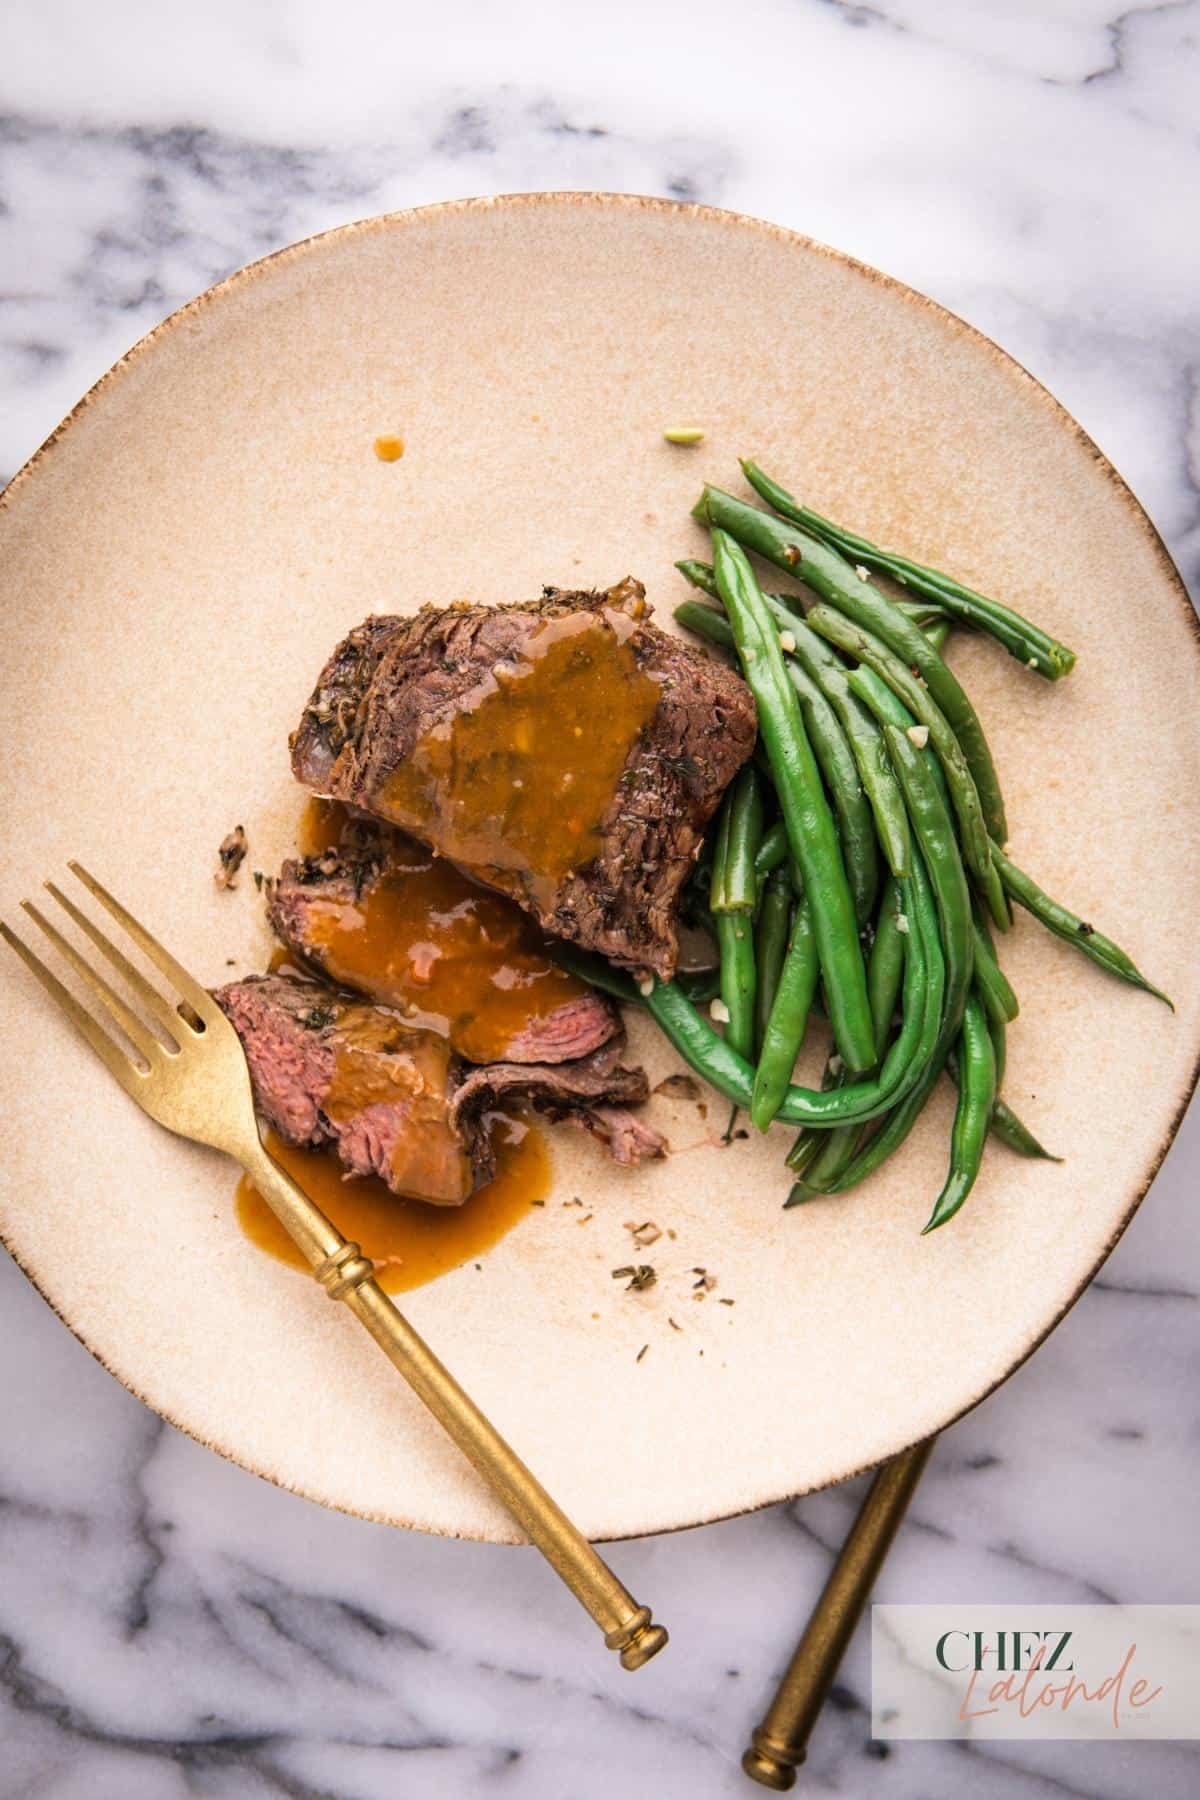 Sous Vide medium rare sous vide filet mignon with gravy and garlic green beans on a round plate and a gold folk